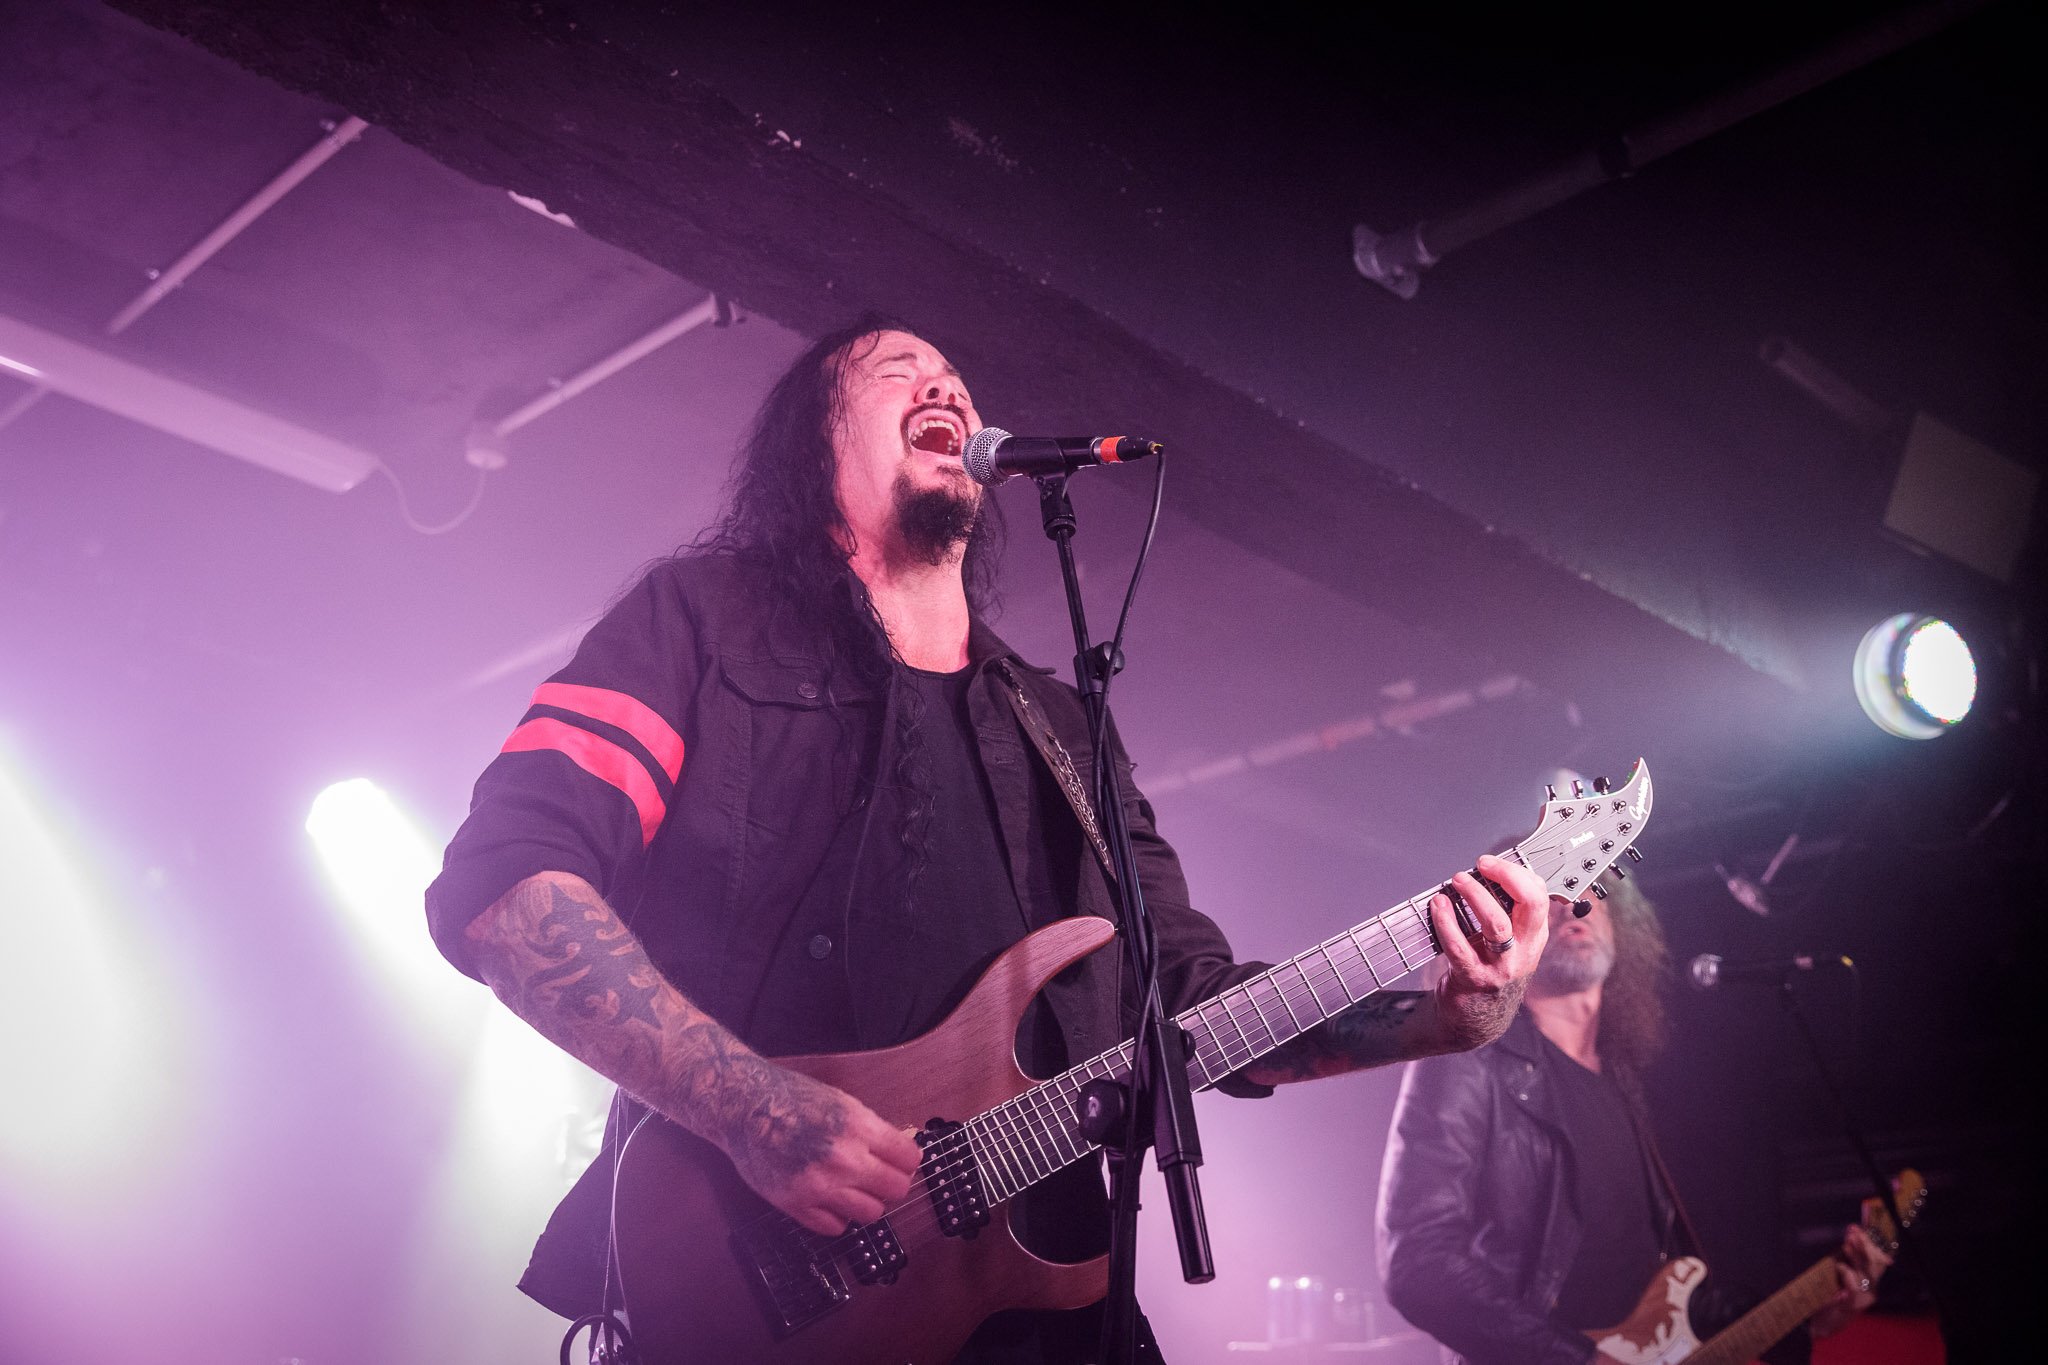 Evergrey at Academy 3 in Manchester on September 20th 2022 ©Joh